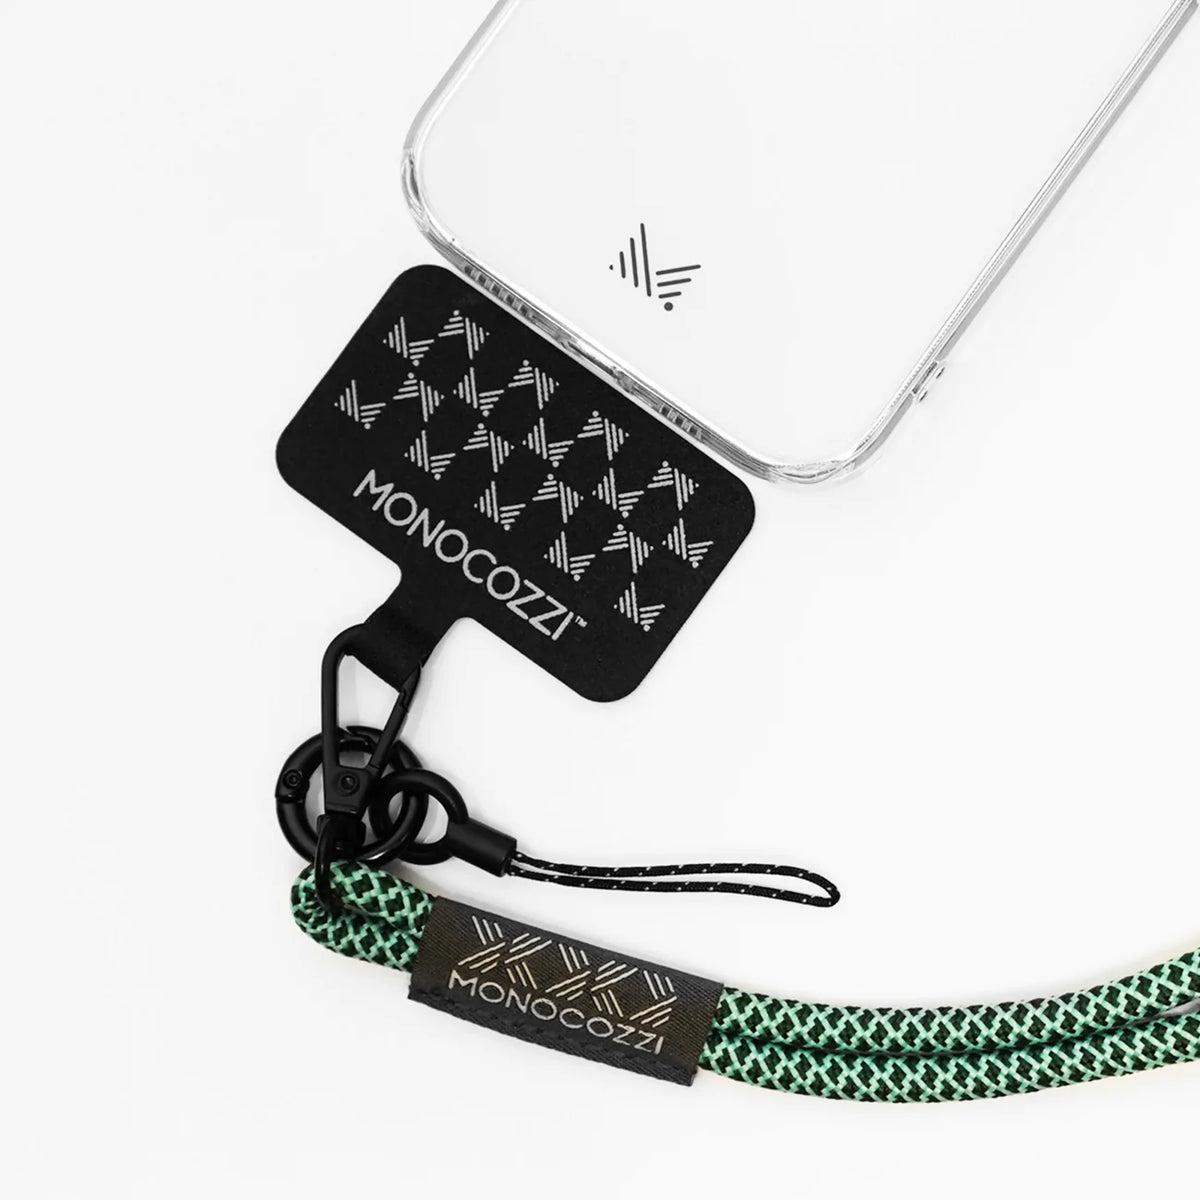 Essentials Rope Phone Strap for iPhone | Monocozzi - Wake Concept Store  